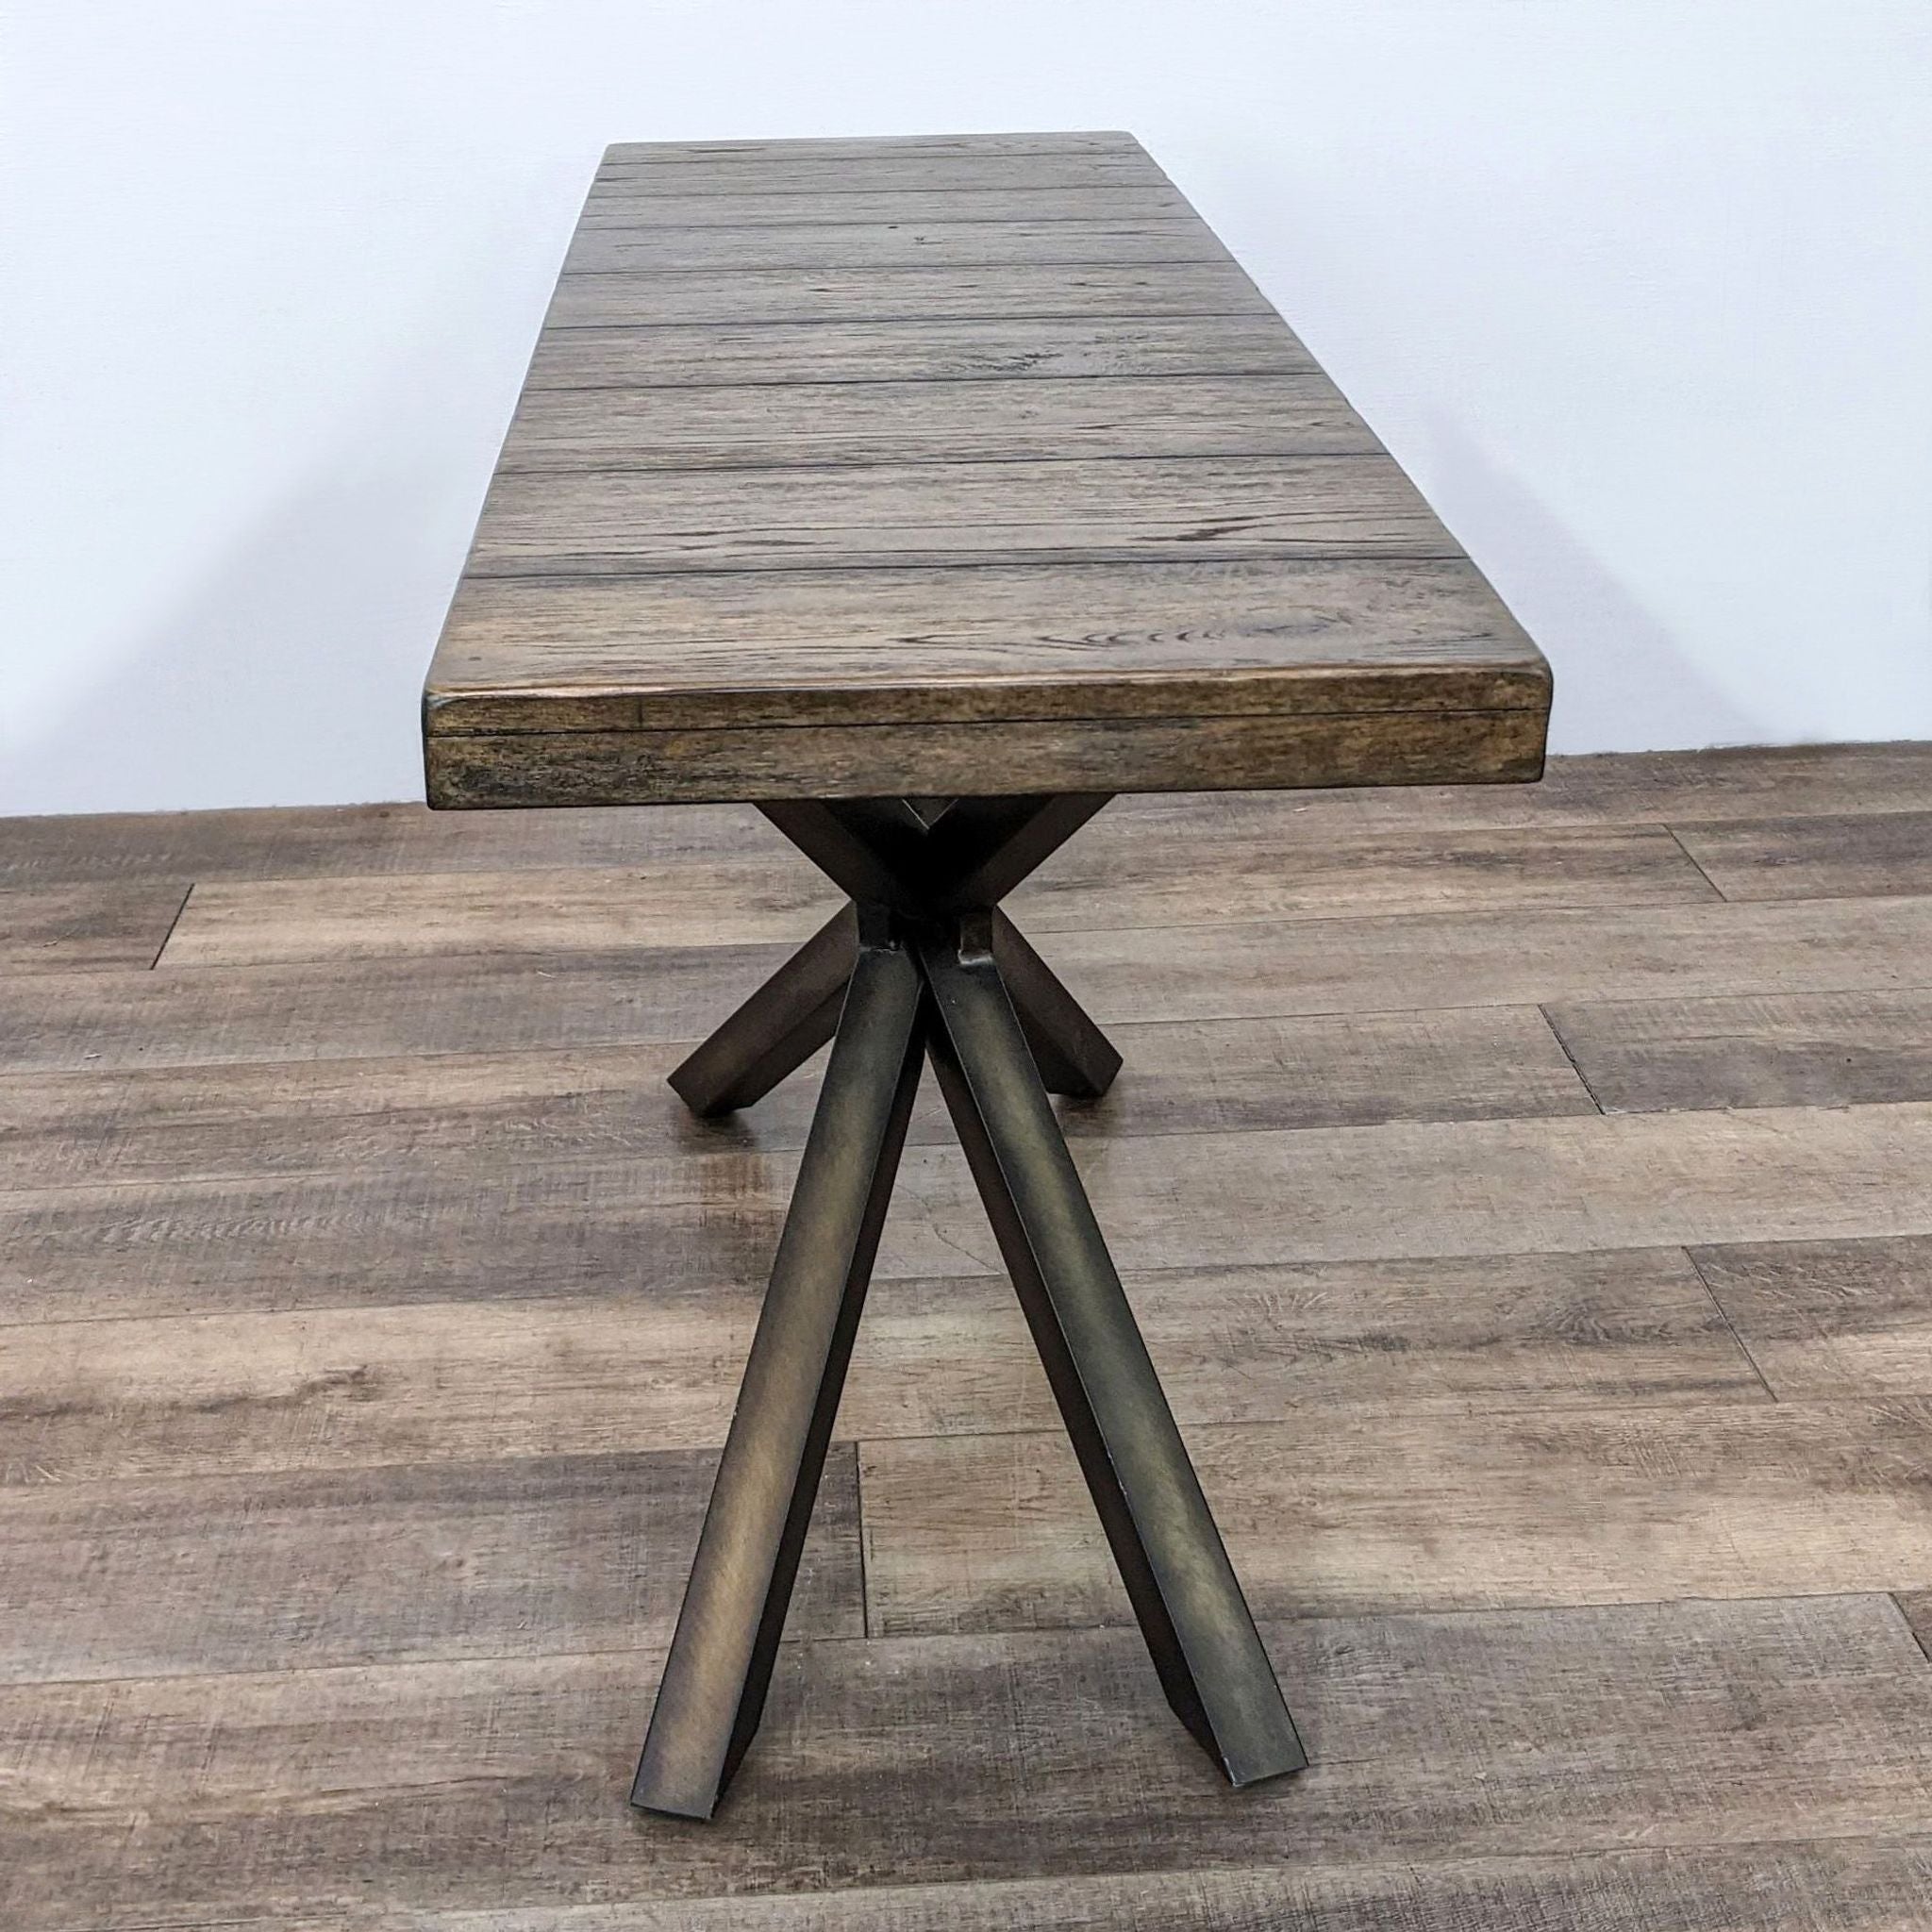 Pottery Barn side table with reclaimed wood top and double cross metal legs, displayed on a wooden floor.